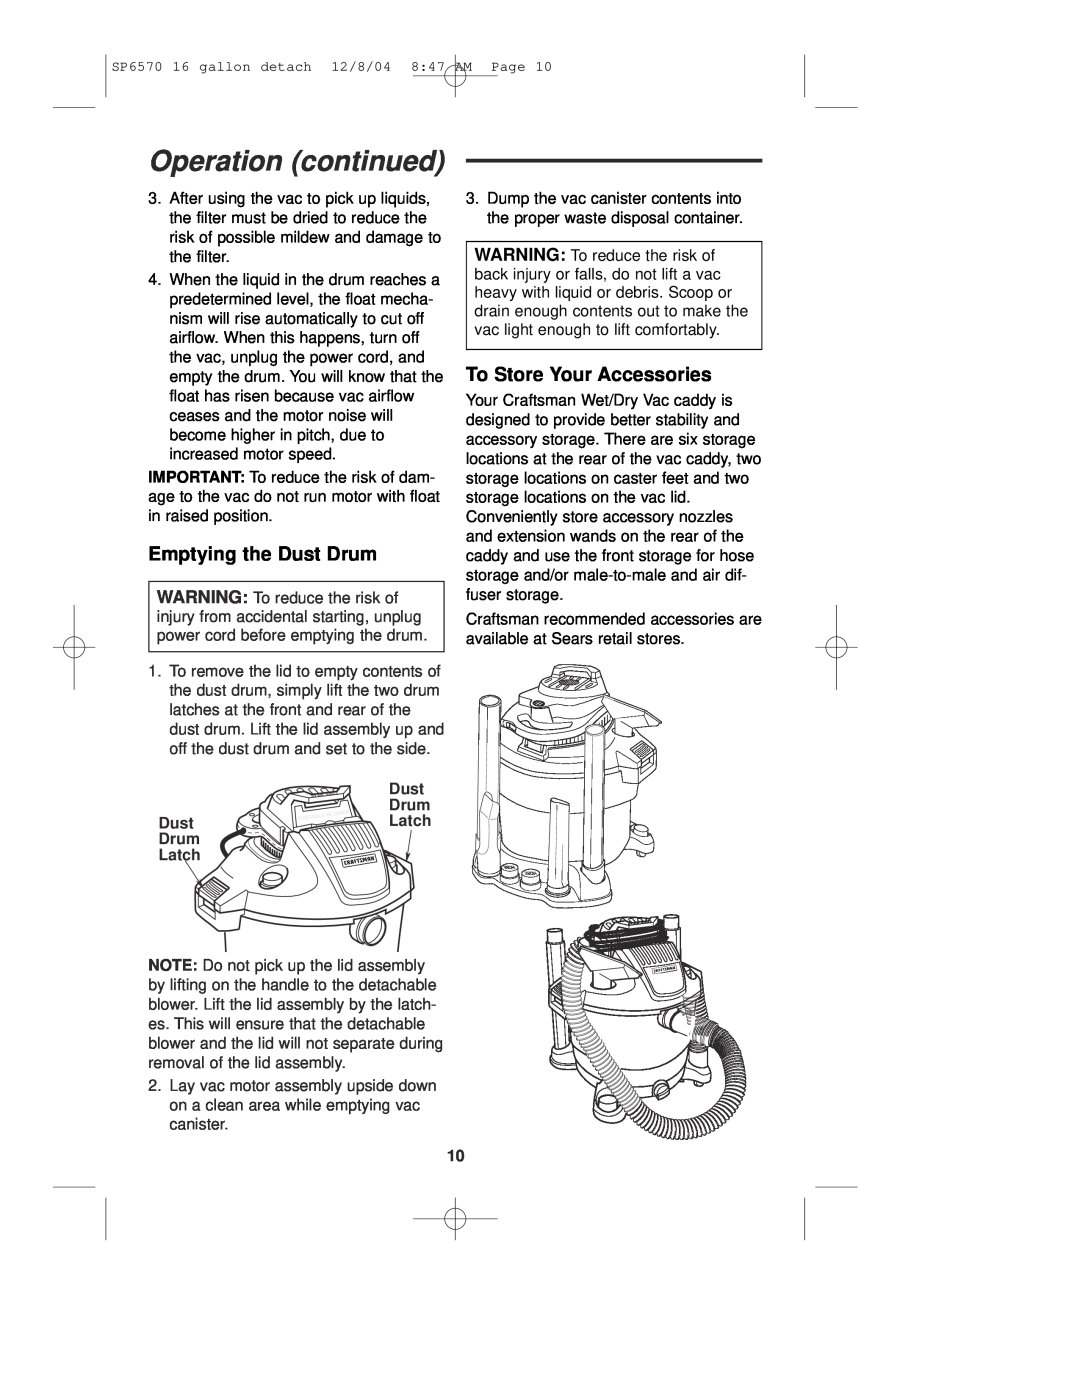 Sears 113.17066 owner manual Operation continued, Emptying the Dust Drum, To Store Your Accessories 